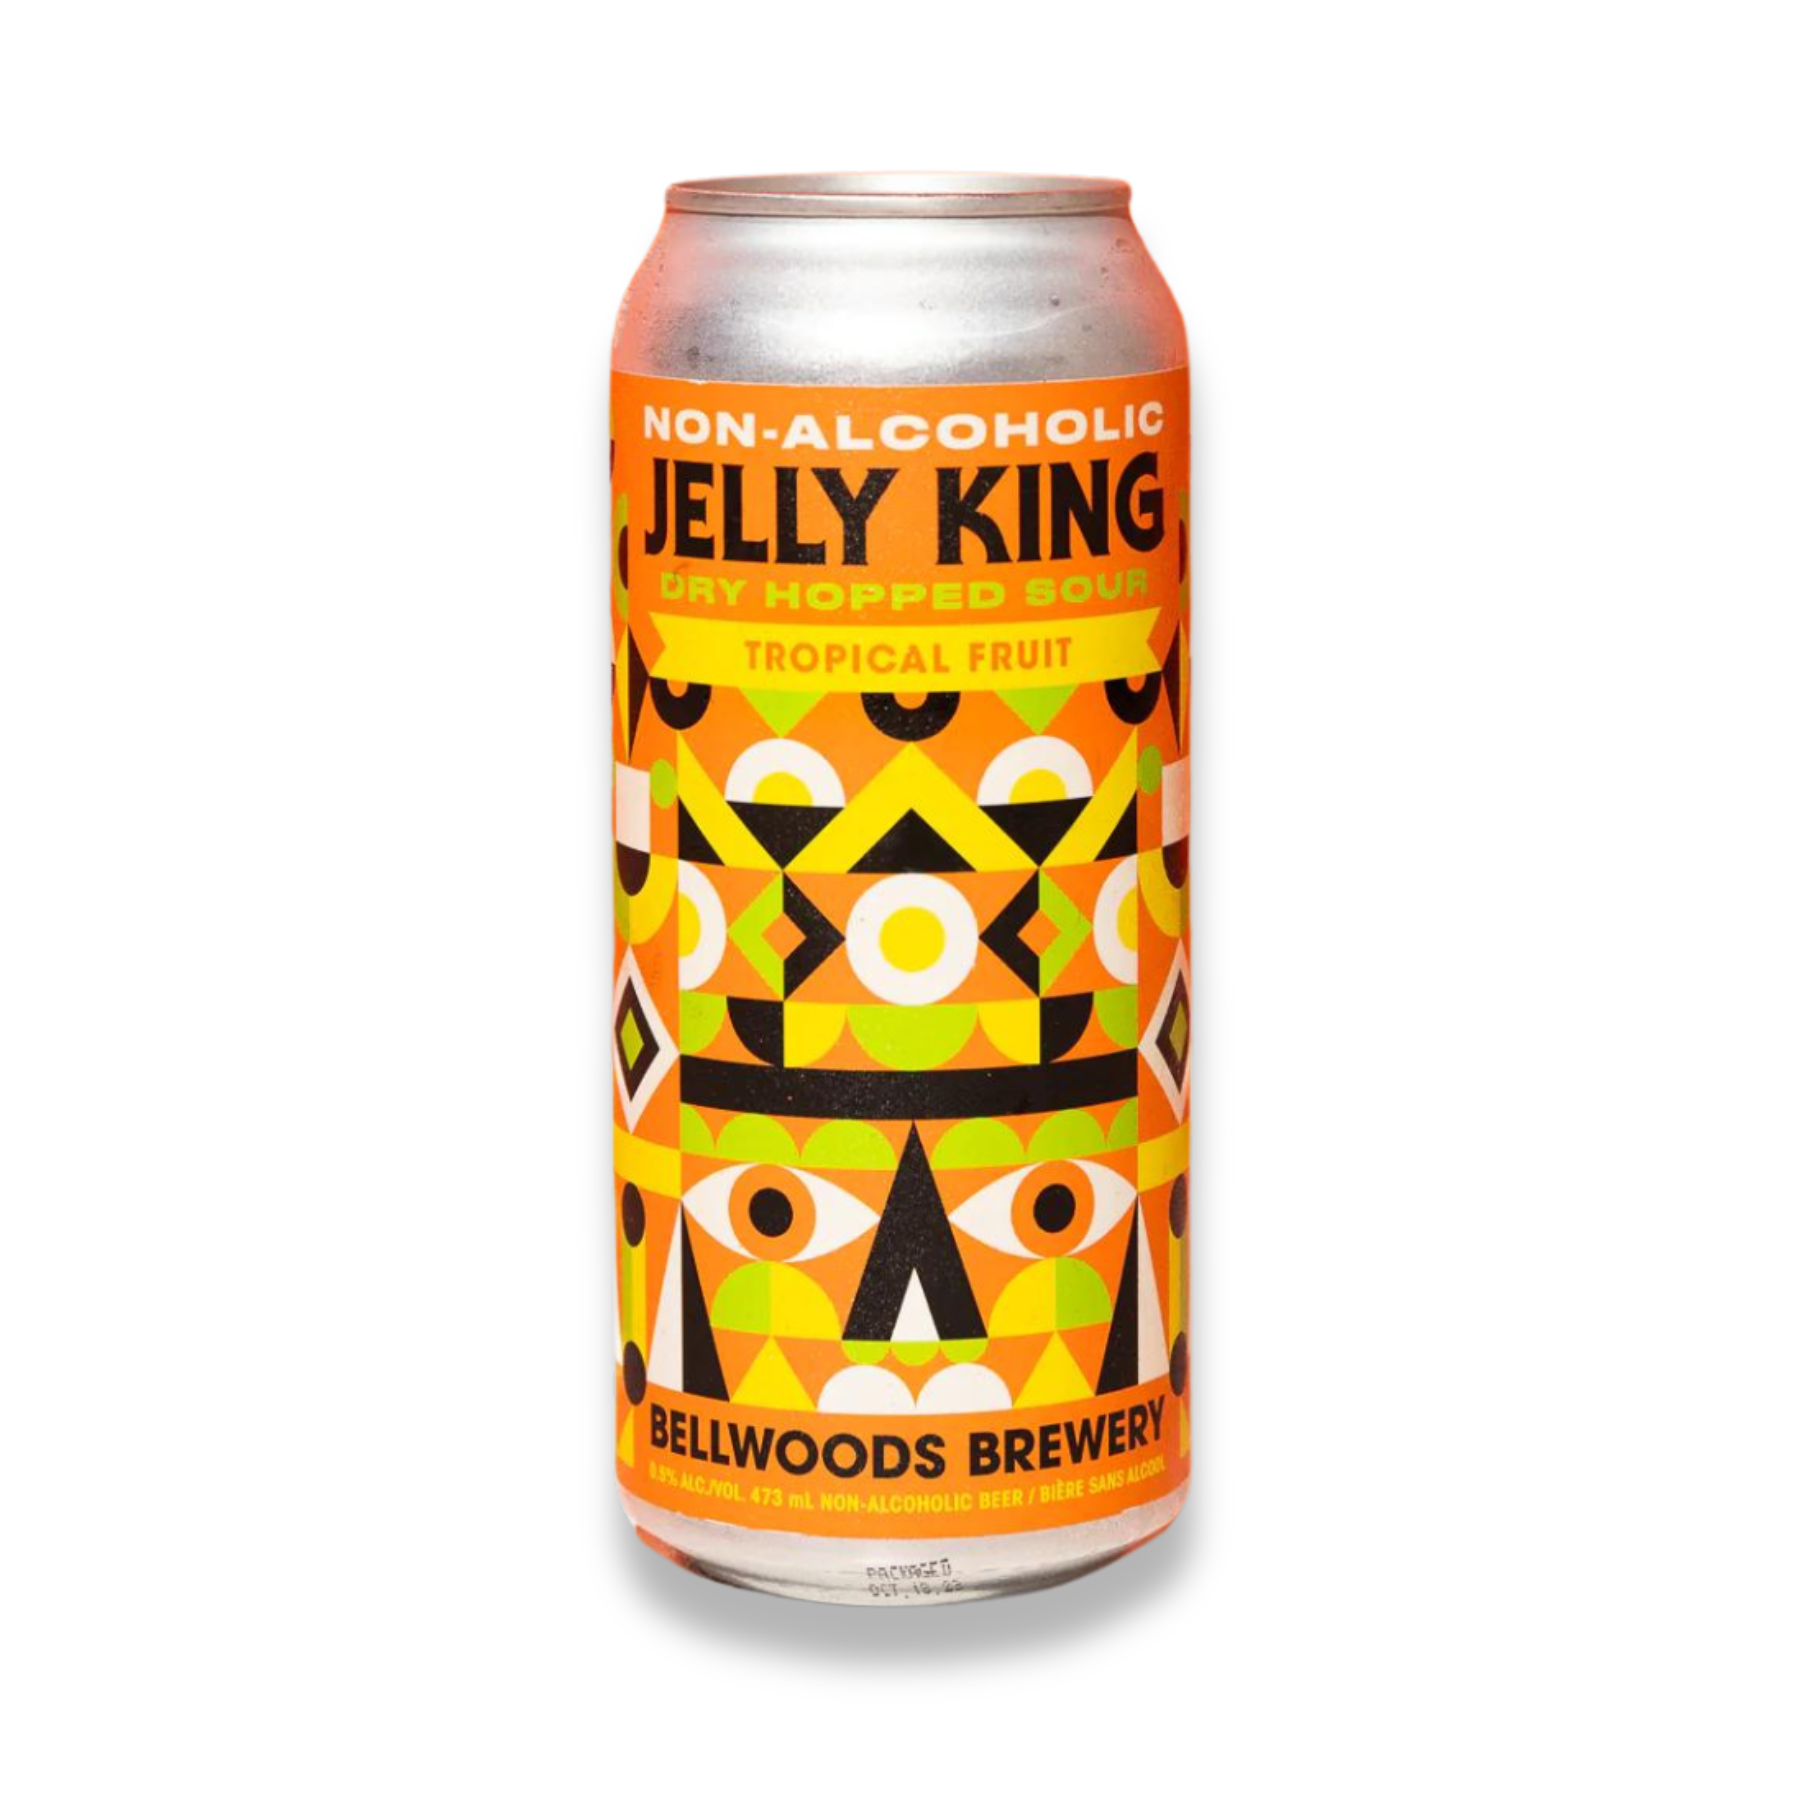 Bellwoods Brewery Jelly King Dry Hopped Non-Alcoholic Sour w/ Tropical Fruit